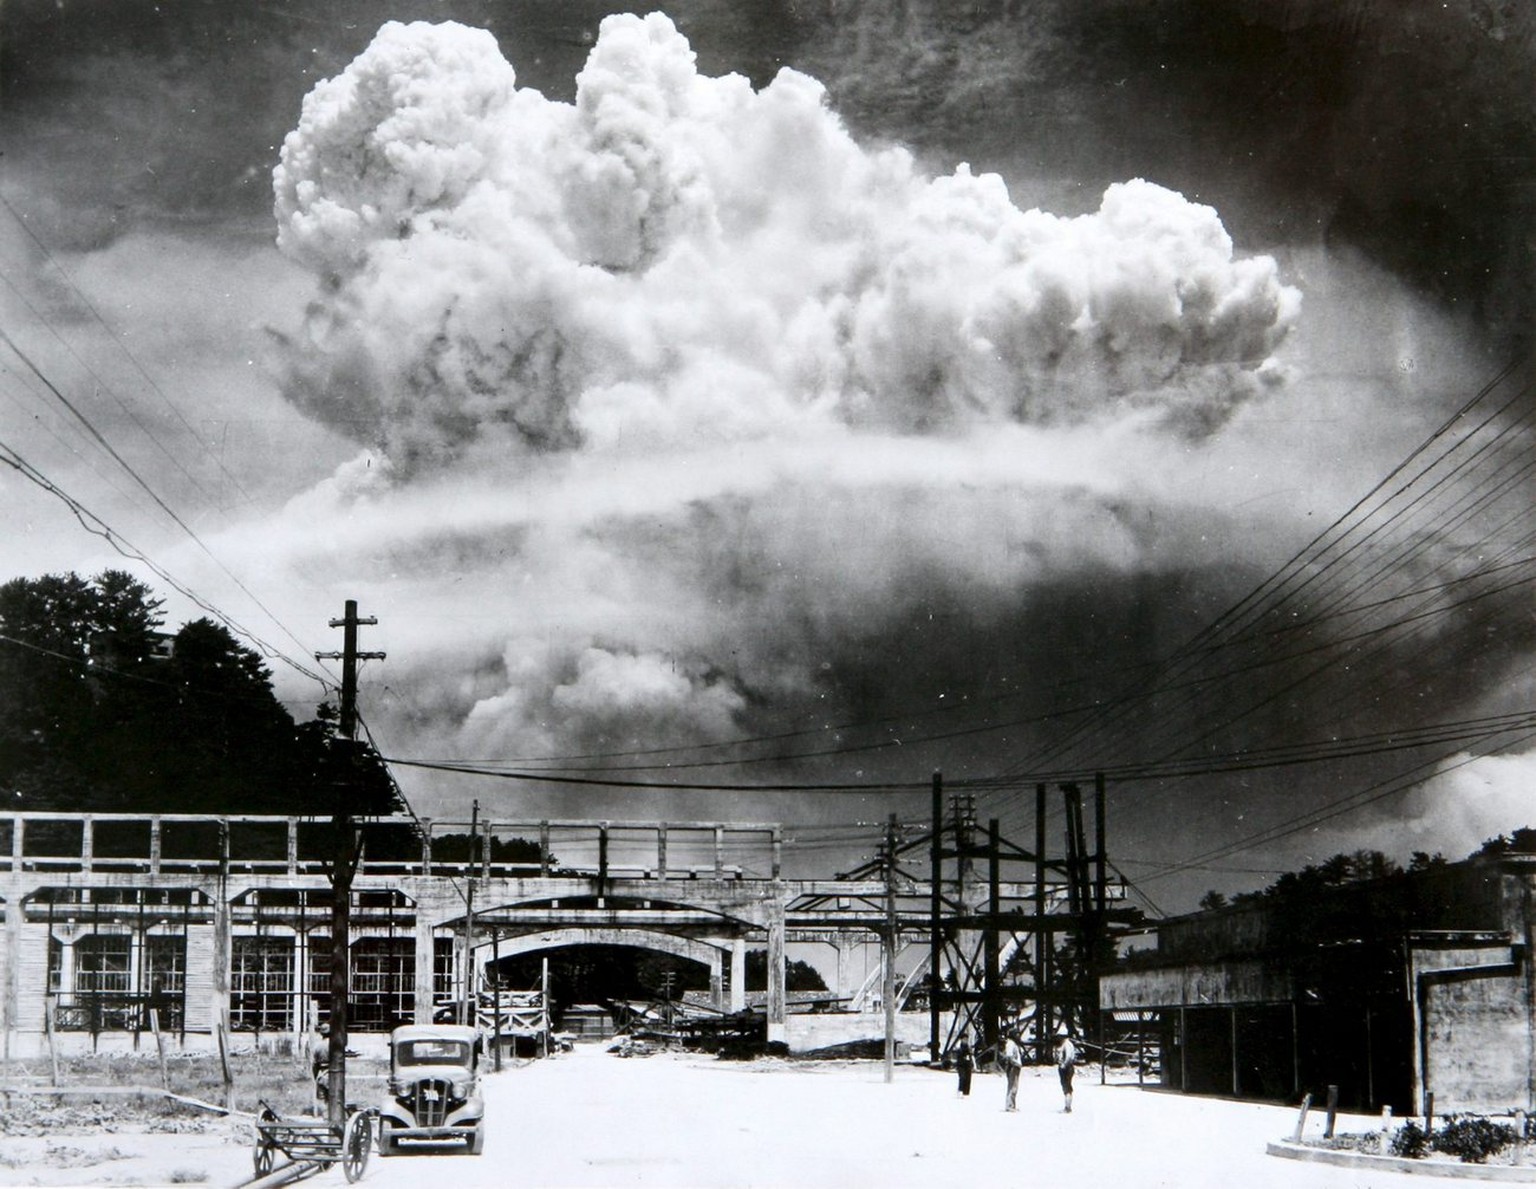 View of the mushroom cloud photographed from the ground of the August 9, 1945 atomic bombing of Nagasaki. Nagasaki will mark the 60th anniversary of its atomic bombing 9 August 2005. (KEYSTONE/EPA/NAG ...